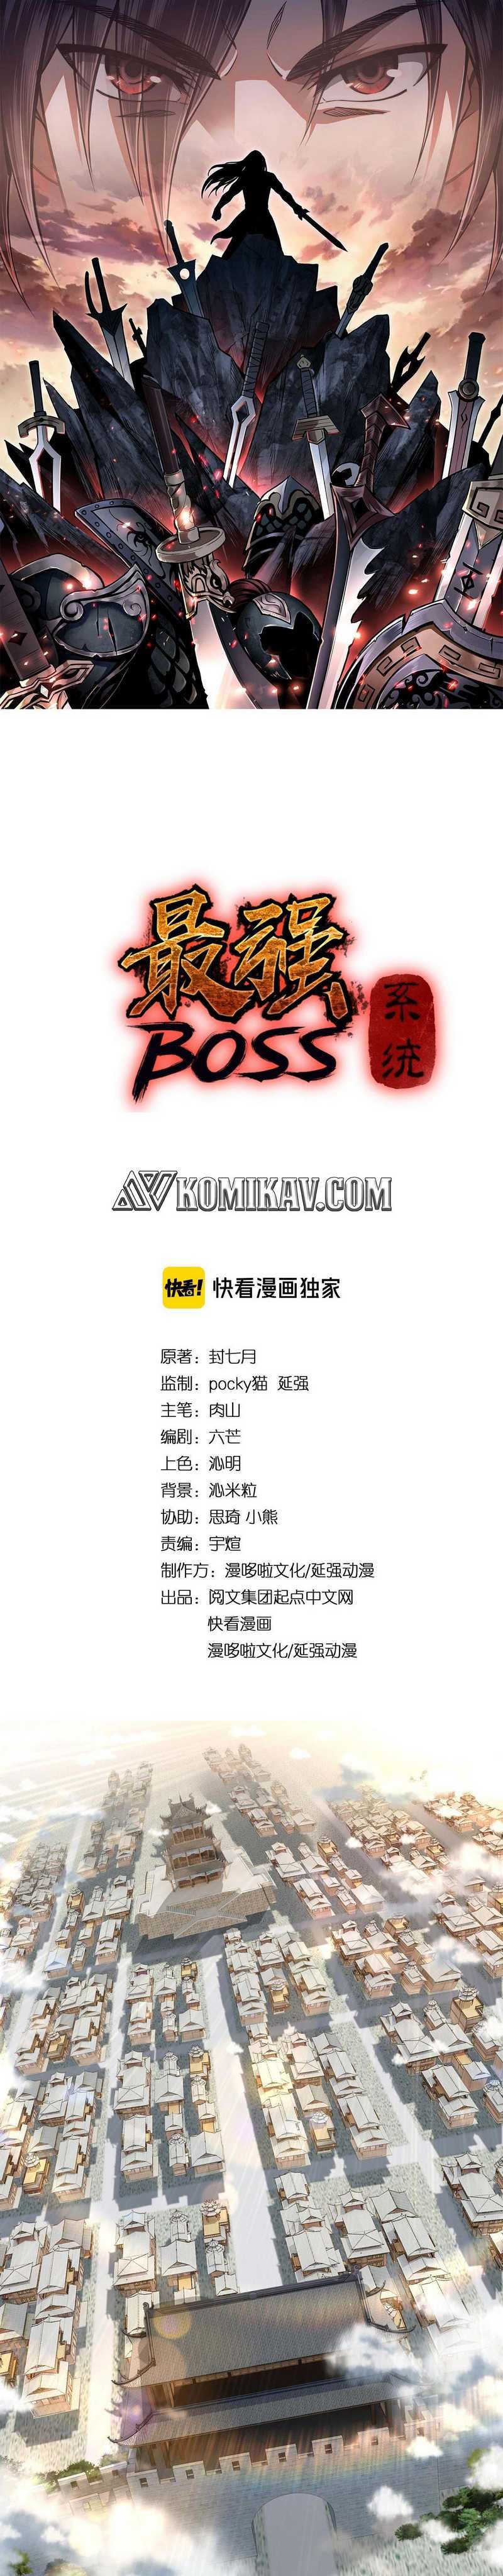 Greatest Boss System Chapter 74